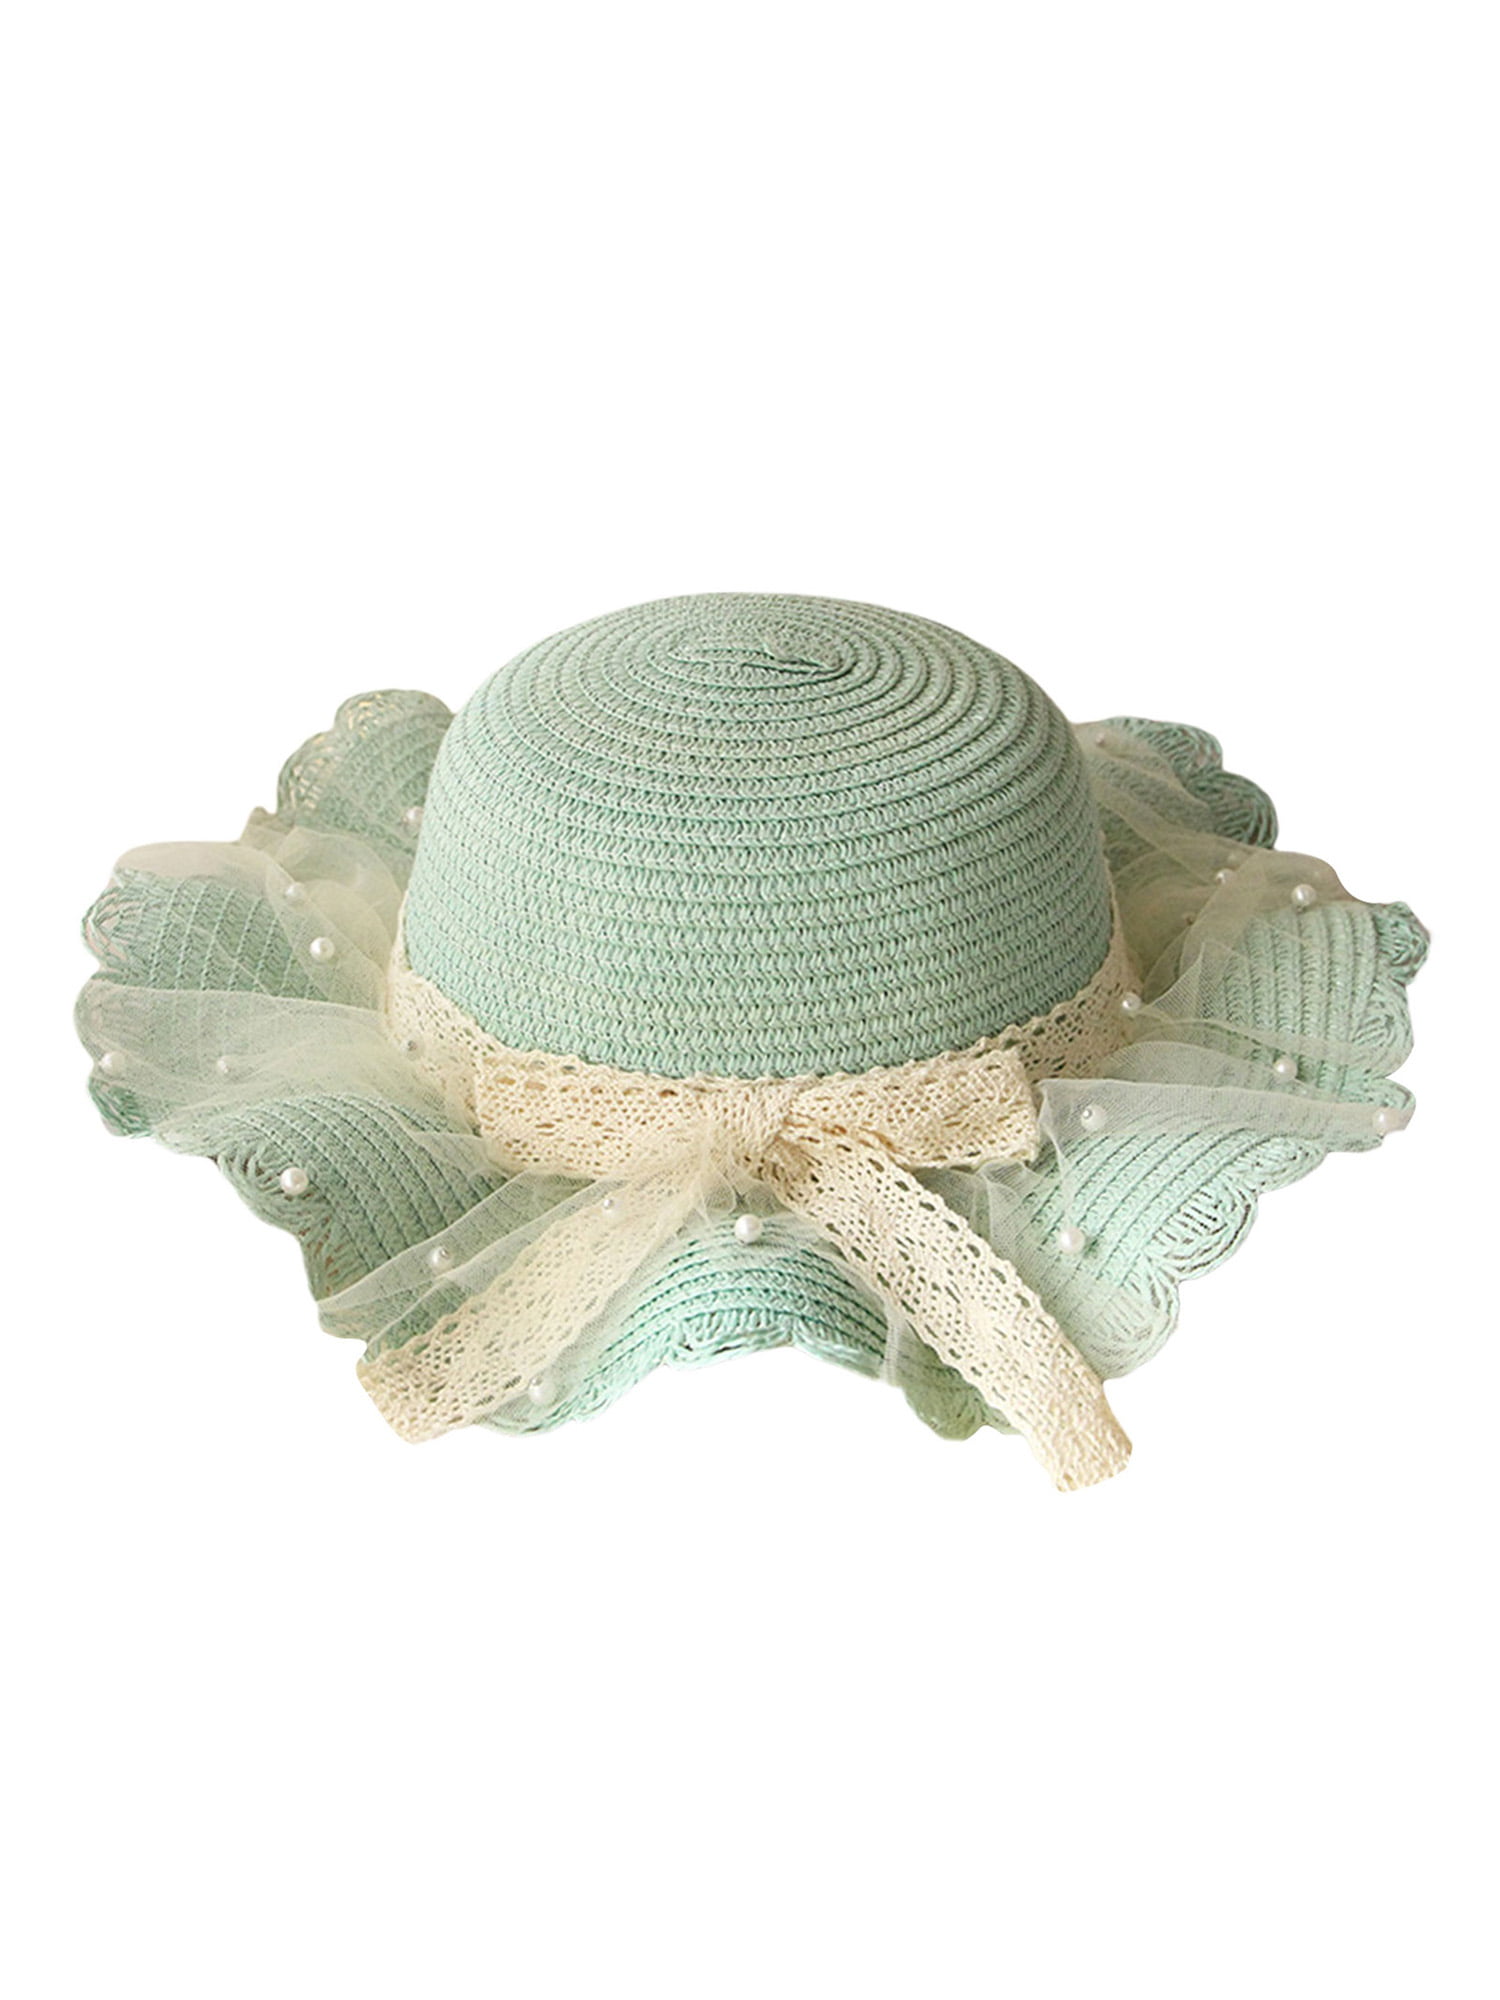 Toddler Girl's Ages 2-4 Wide-Brim Straw Sun Hat w/Daisy Trim and Matching Purse 